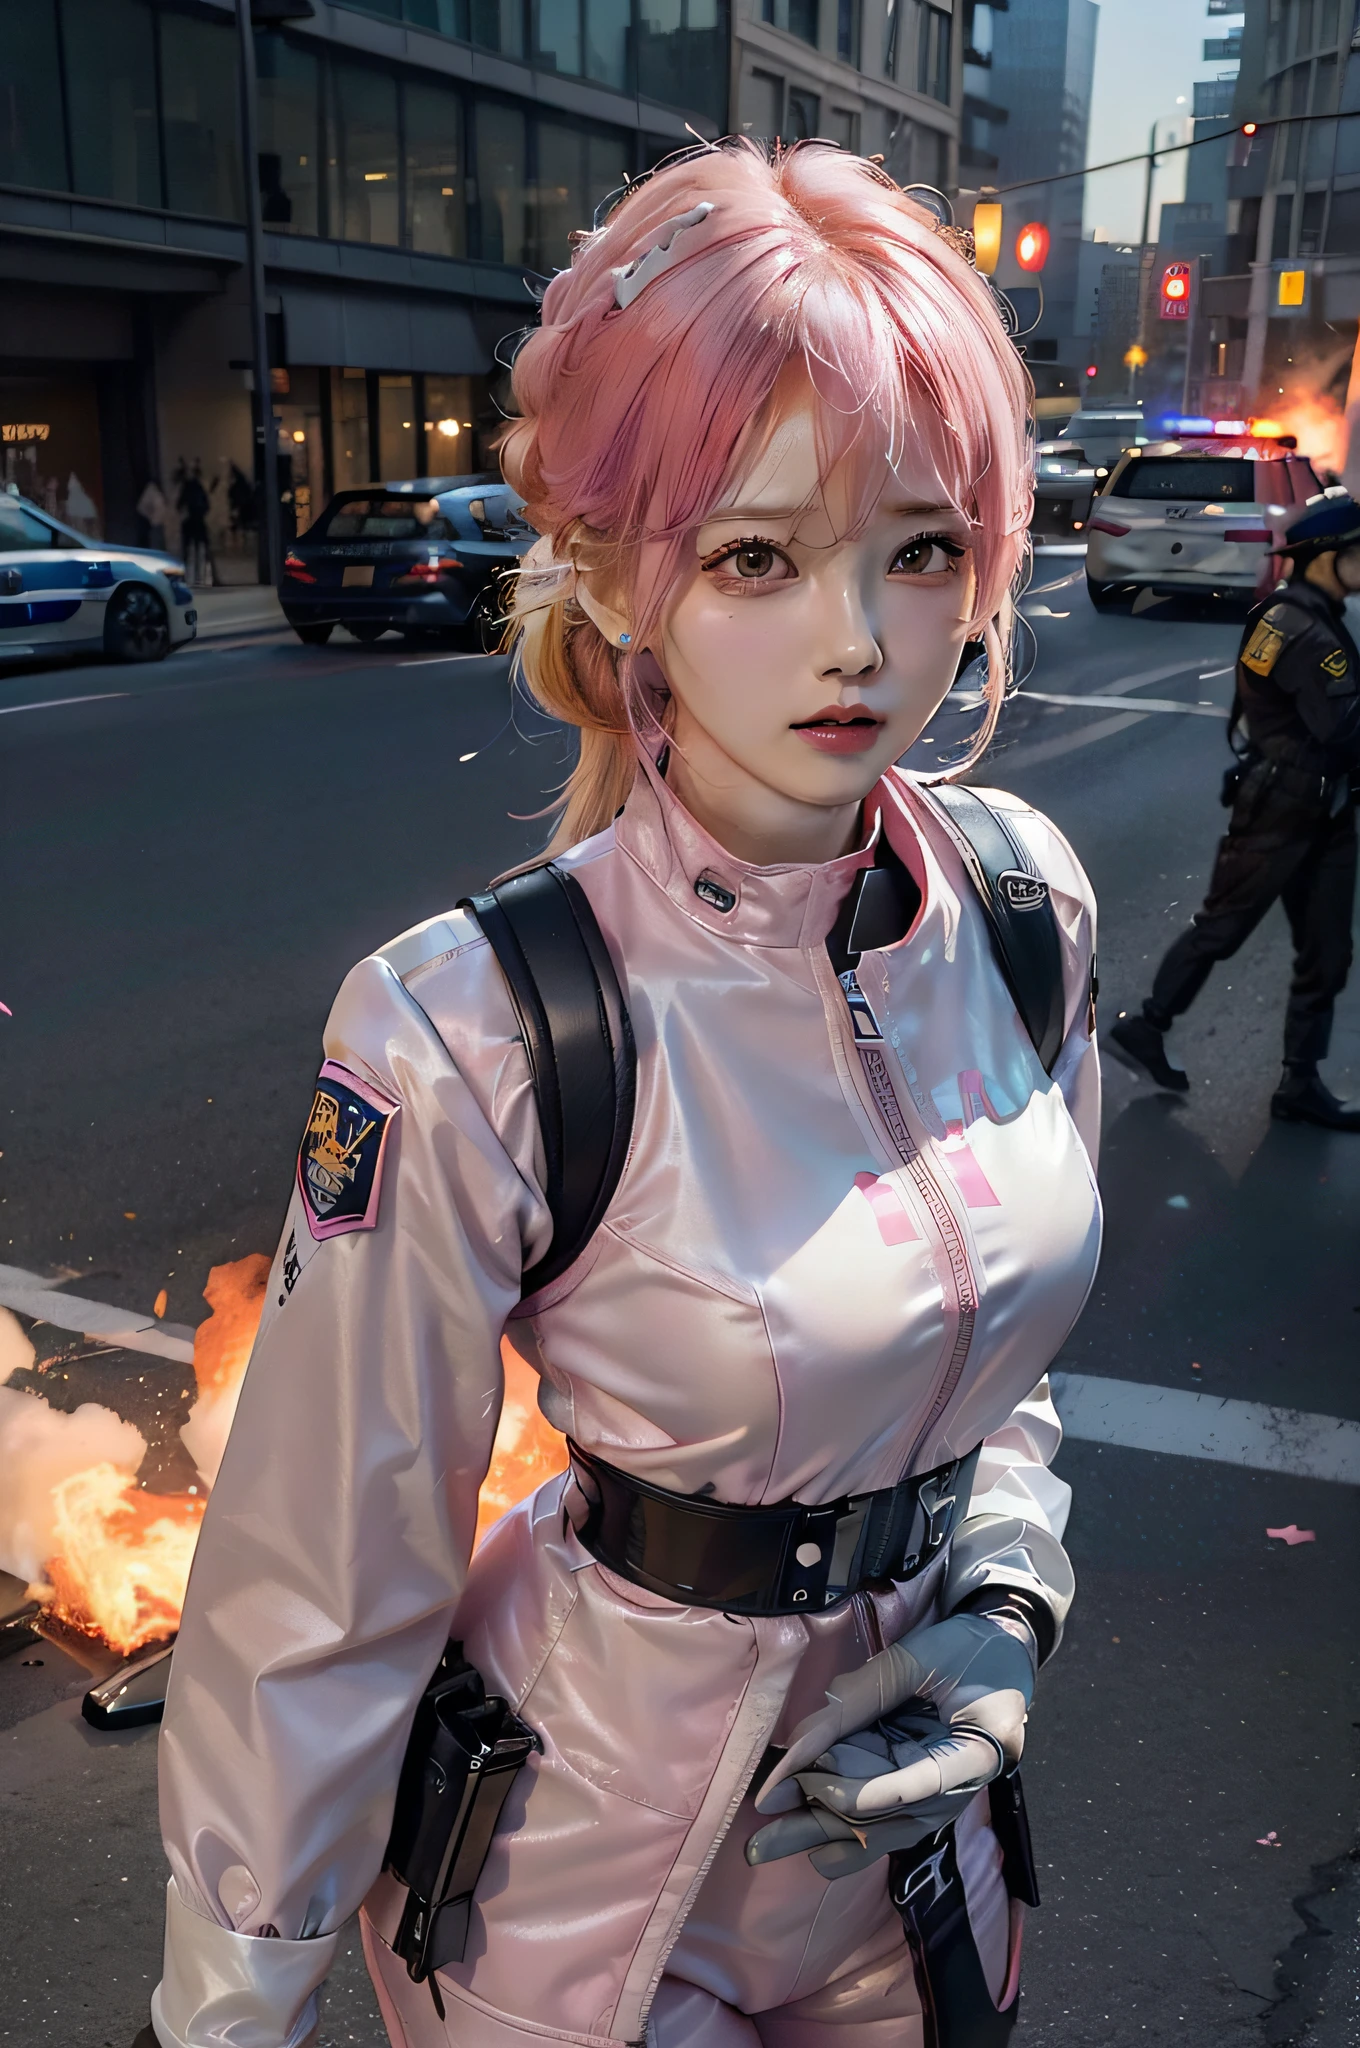 Top Quality, Ultra High Definition, (backlight), (Photorealistic: 1.4), (Pink updo Hair: 1.3), 1 Girl, (Kpop Idol), Detailed Face, Contrapposto, Smooth Skin, Perfect Anatomy, Cityscape, Professional Lighting, ((wearing Futuristic Racing Suits like Police uniform, police wappen, High-tech Headset, military harness, racing gloves, machinegun)), ("POLICE", pink hair,), (background, (Audience Coming close), daylight, crashed cars, fire, (Explosion),